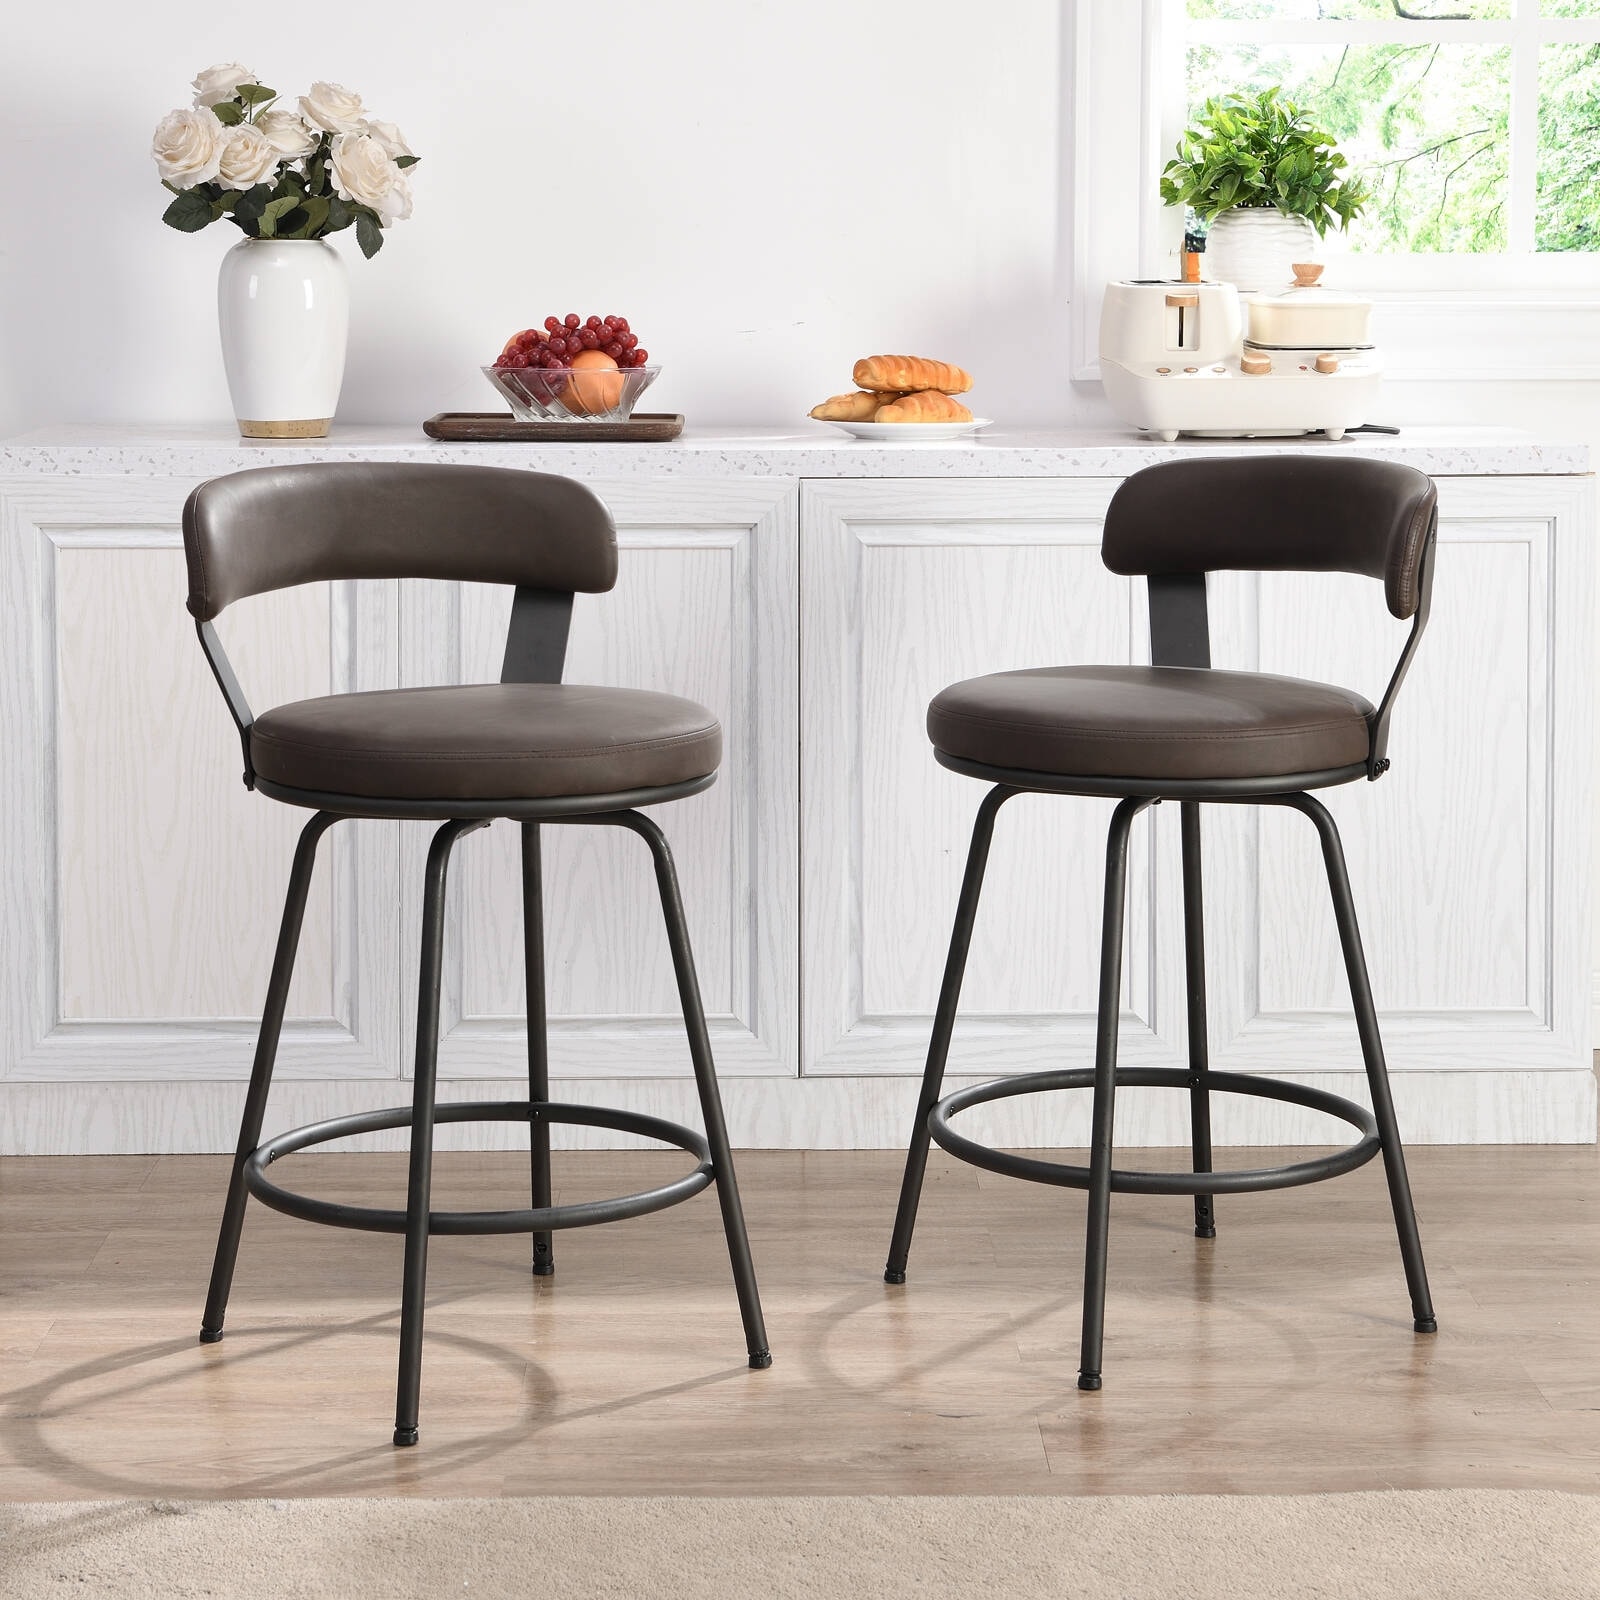 Hausfame Metal Counter Height Industrial Swivel Bar Stools - On